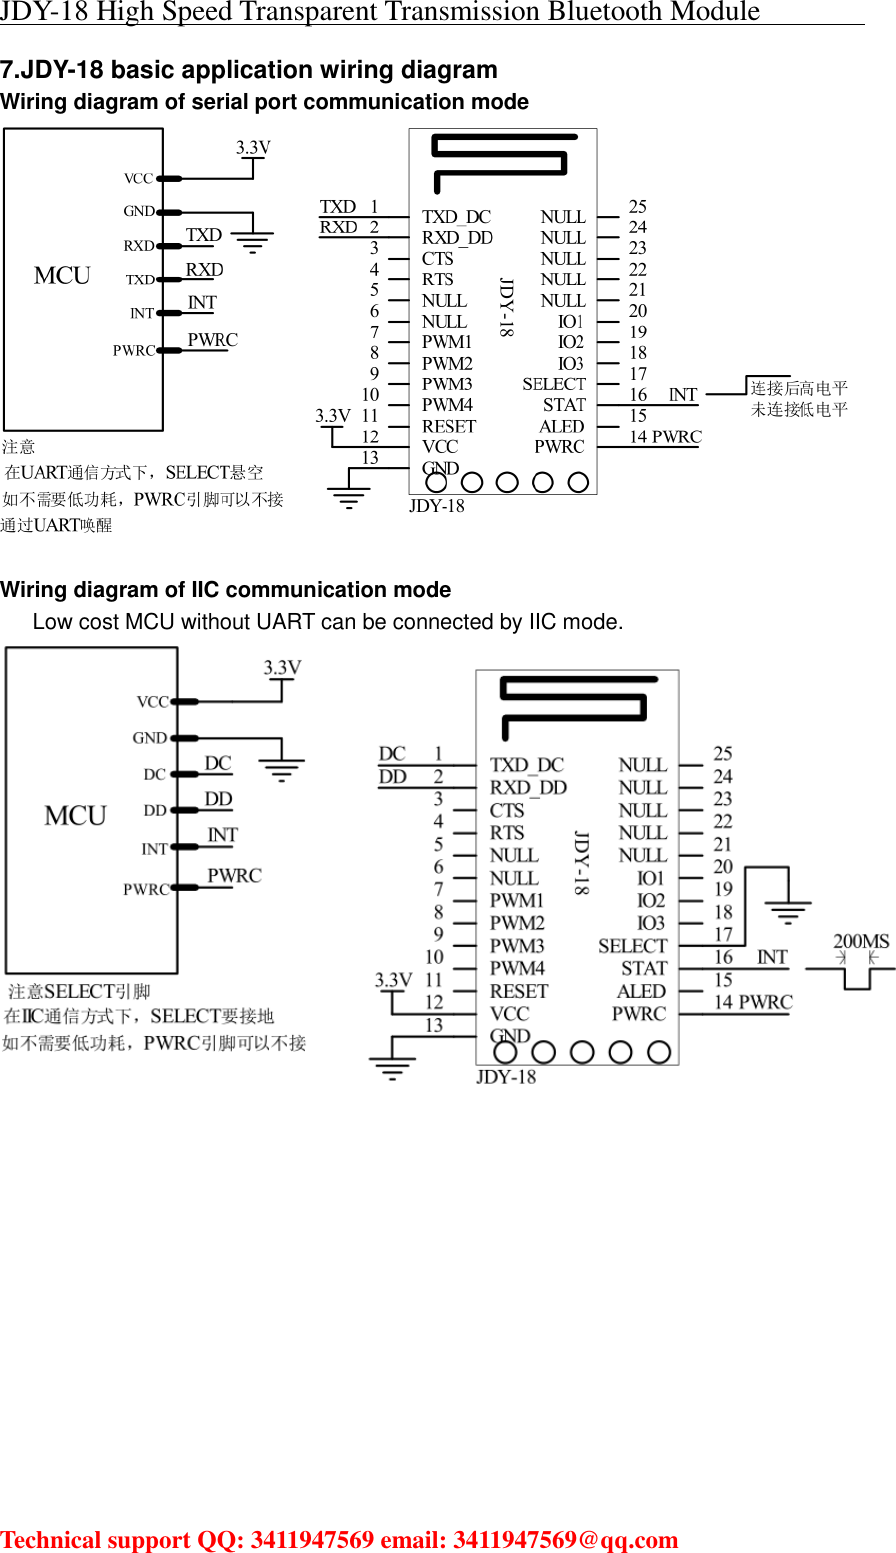 JDY-18 High Speed Transparent Transmission Bluetooth Module                                     Technical support QQ: 3411947569 email: 3411947569@qq.com   7.JDY-18 basic application wiring diagram Wiring diagram of serial port communication mode   Wiring diagram of IIC communication mode    Low cost MCU without UART can be connected by IIC mode.              